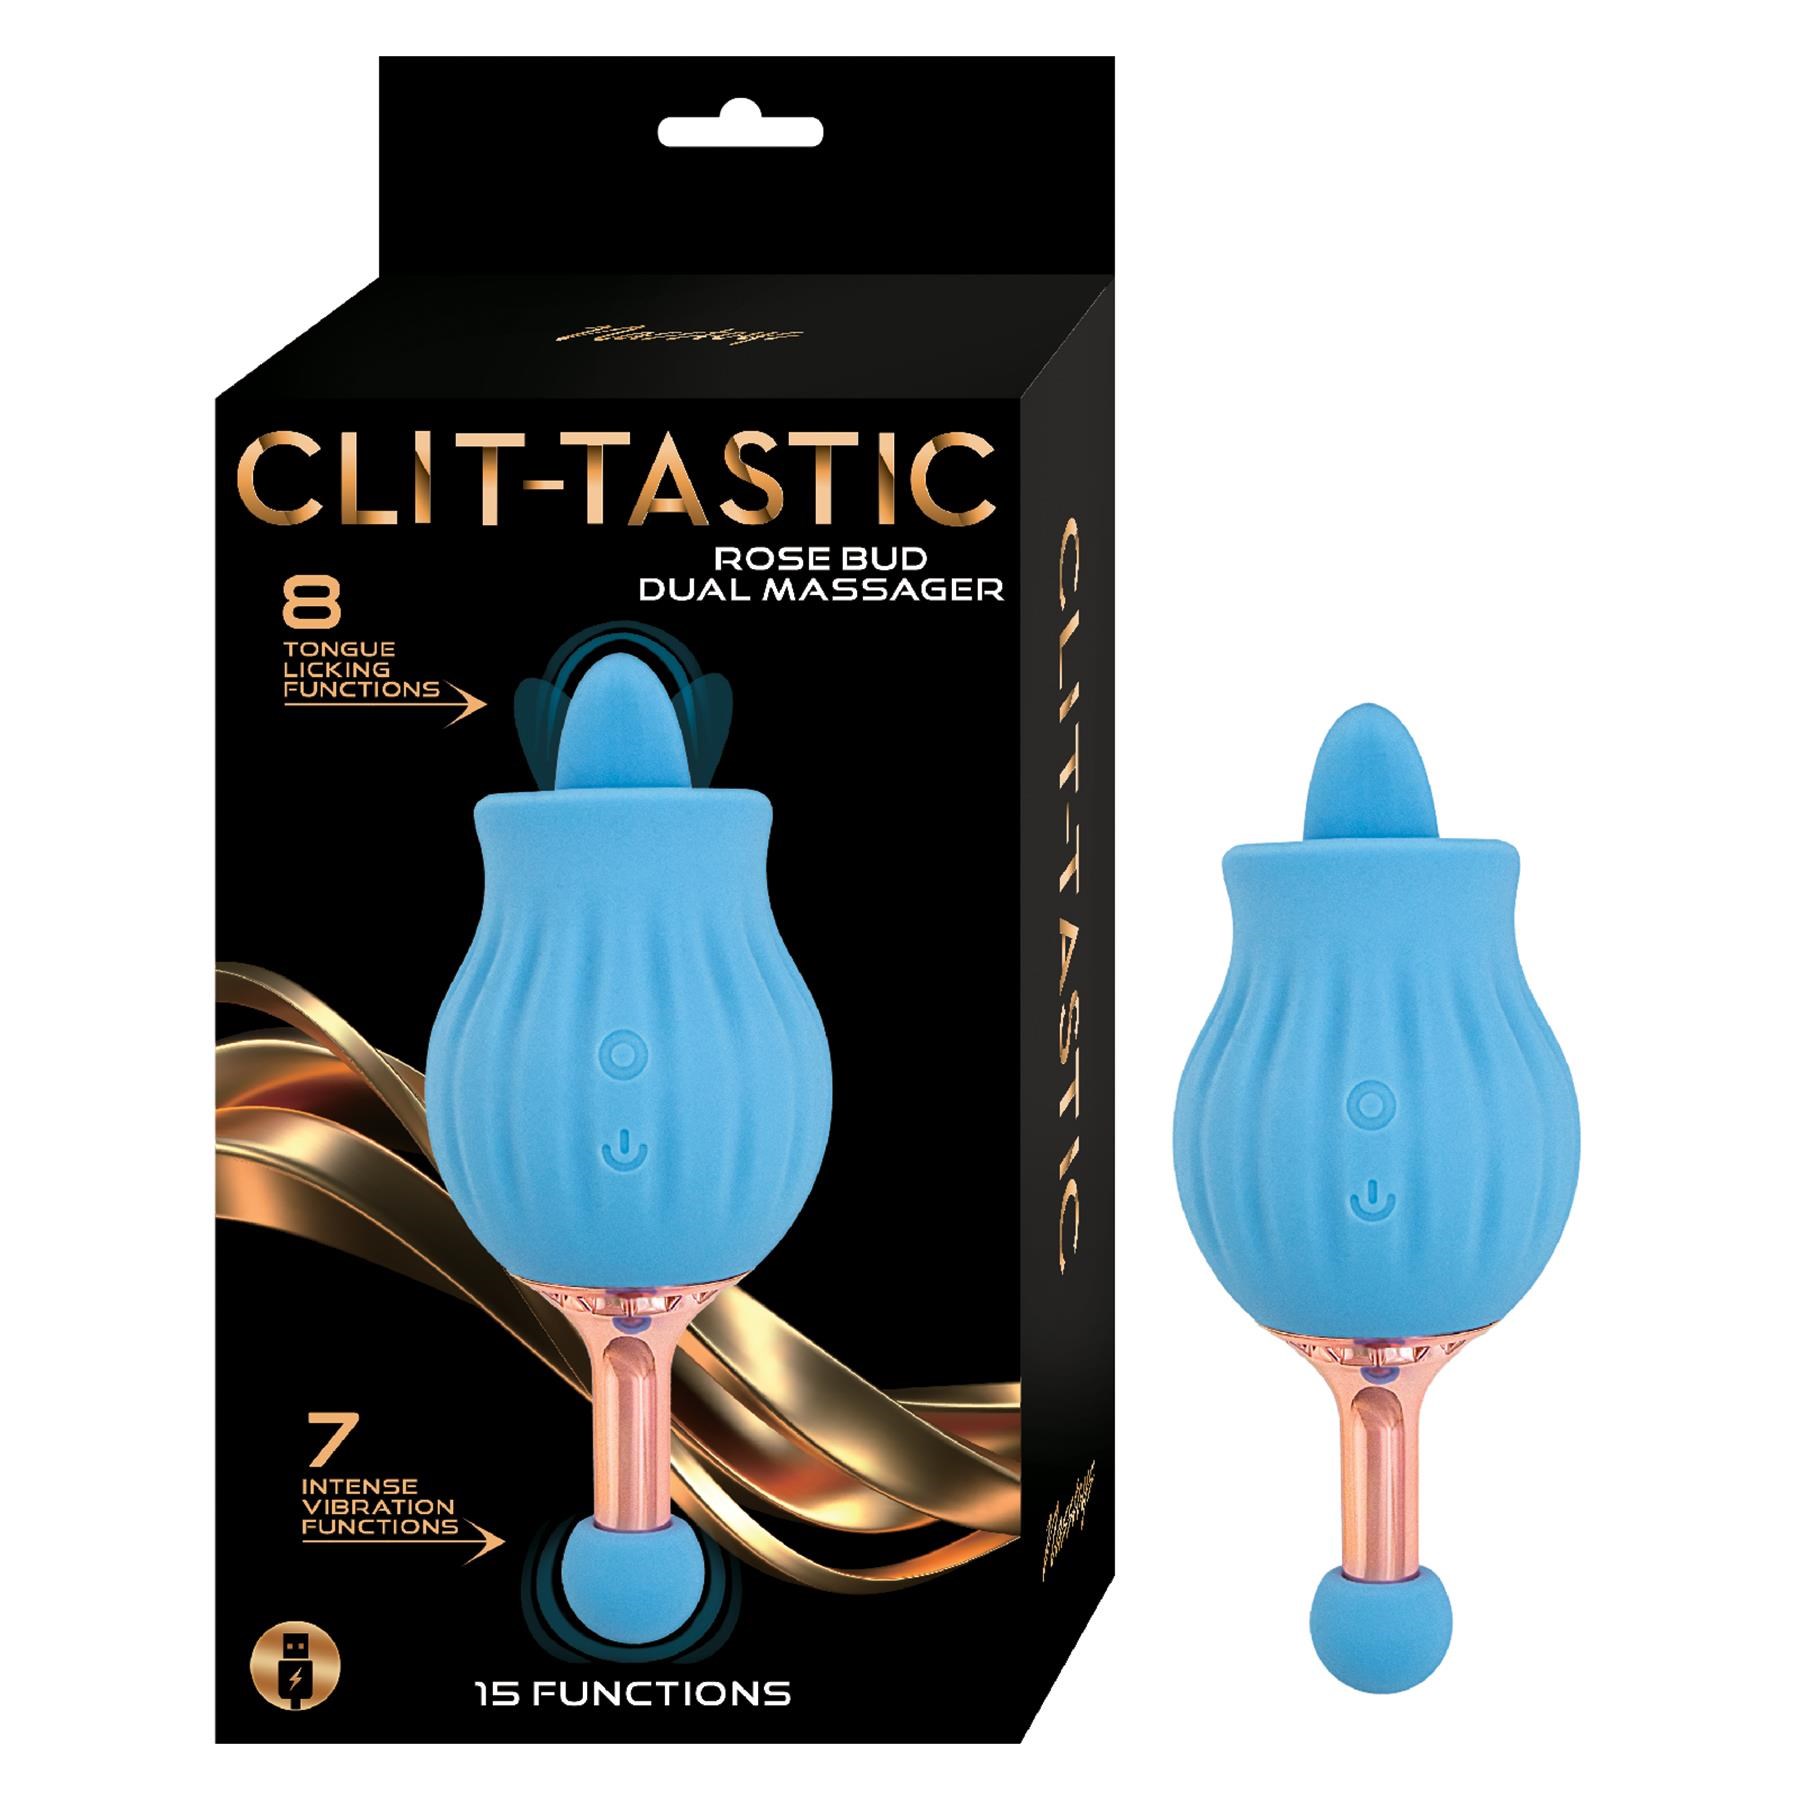 Clit-Tastic Rose Bud Dual Massager - Product and Packaging